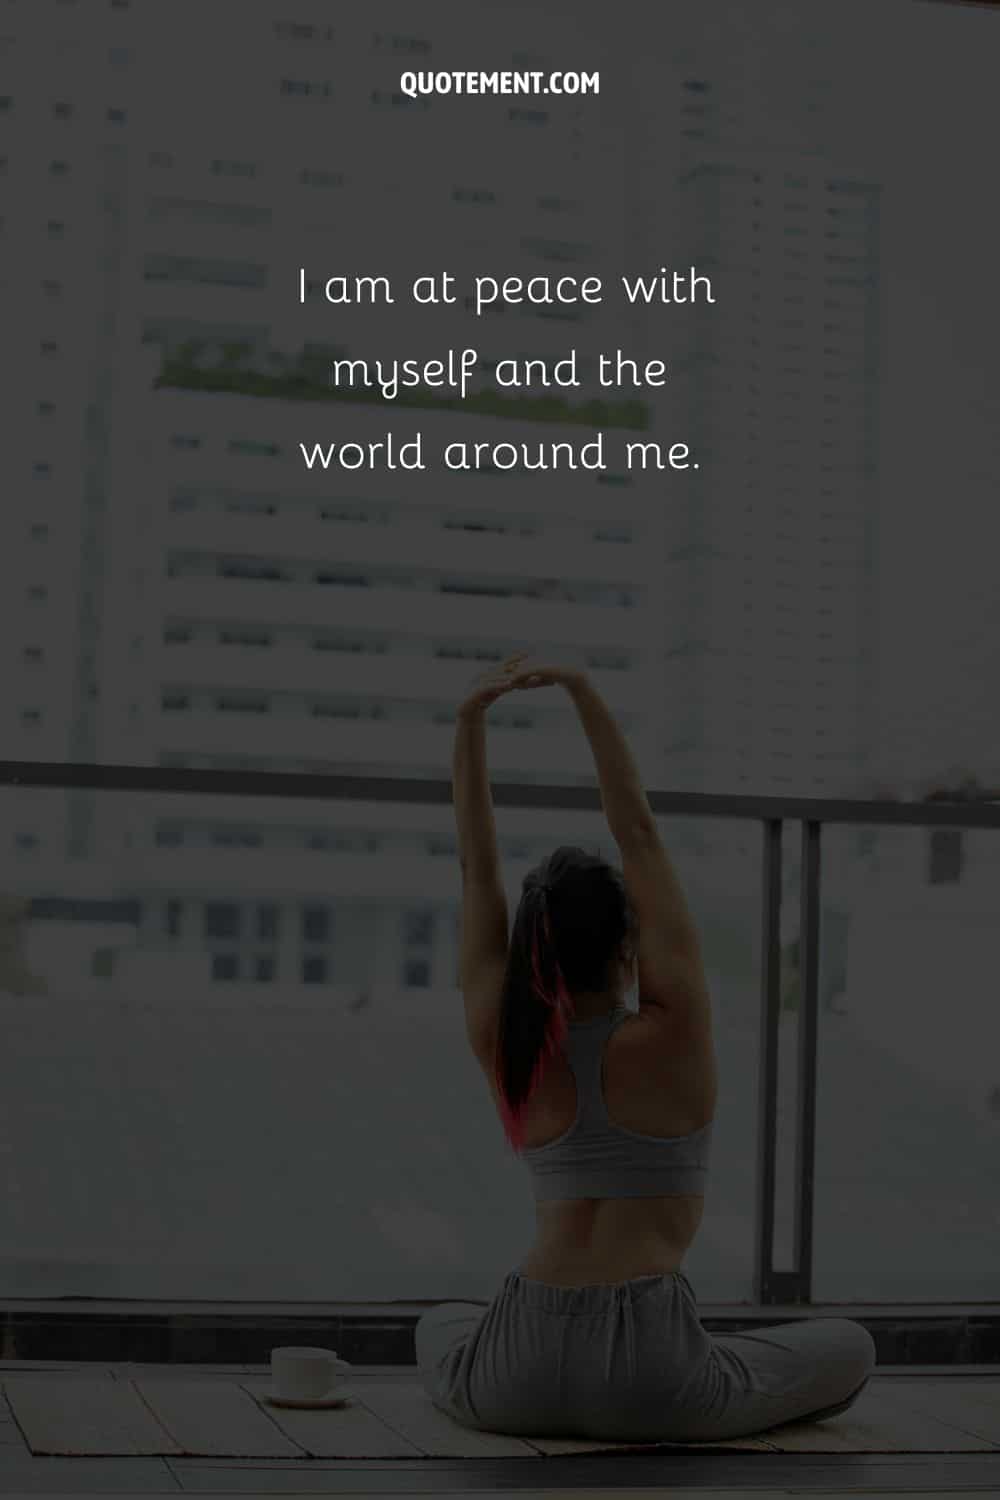 Woman gently stretching her back image representing an affirmation for peace